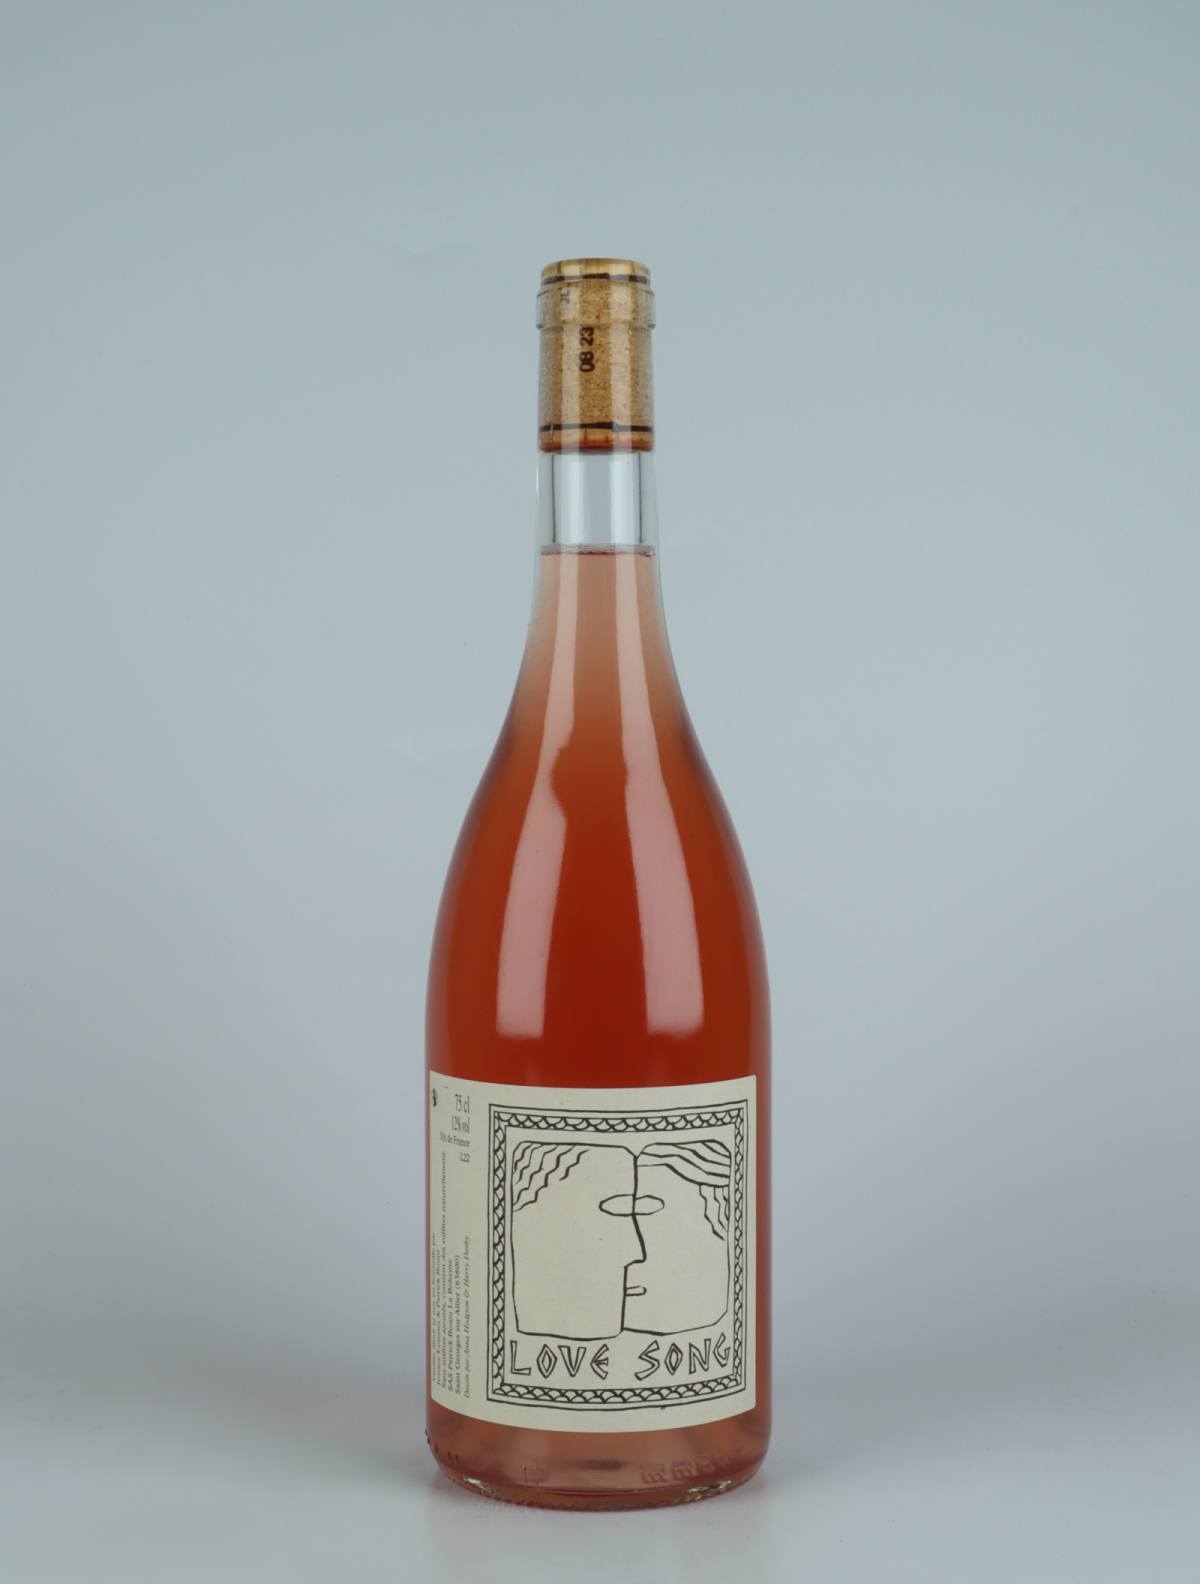 A bottle 2022 Love Song Rosé from Patrick Bouju, Auvergne in France